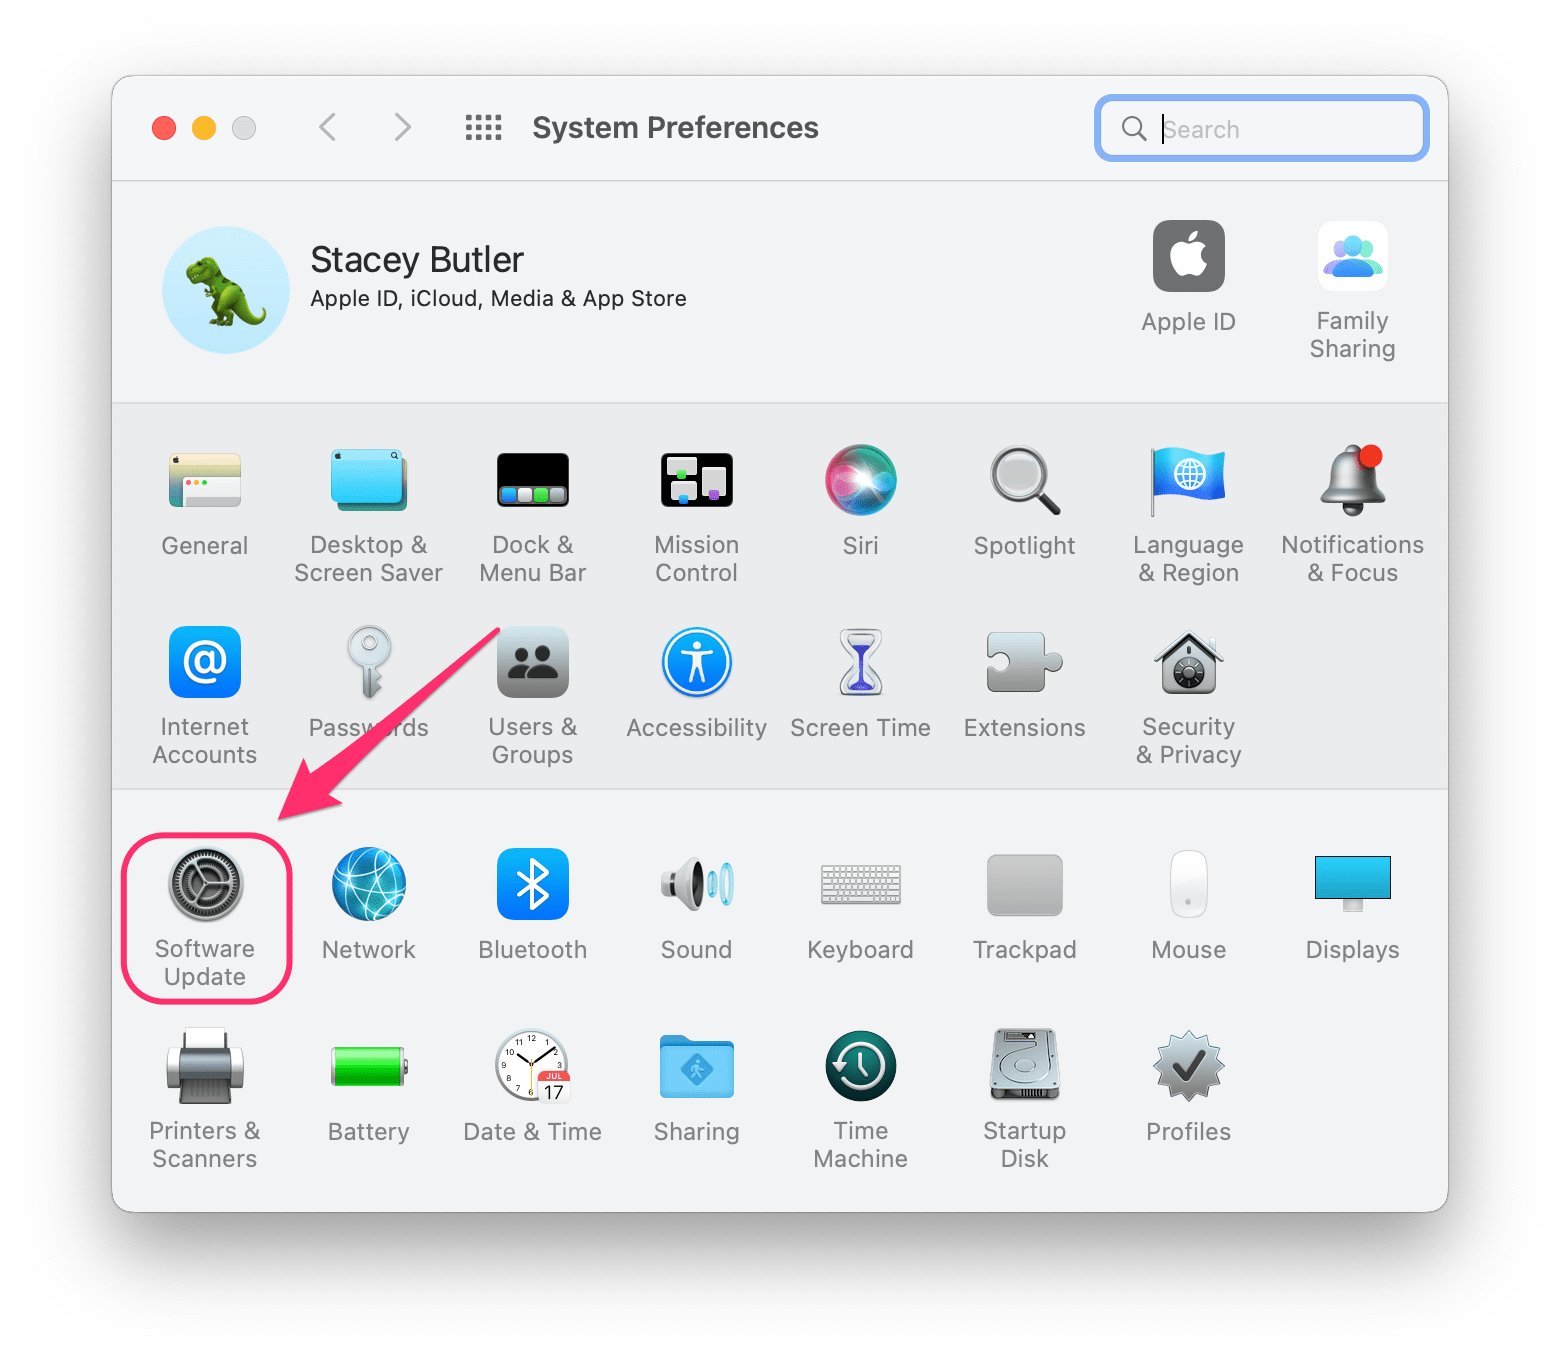 software update in system preferences